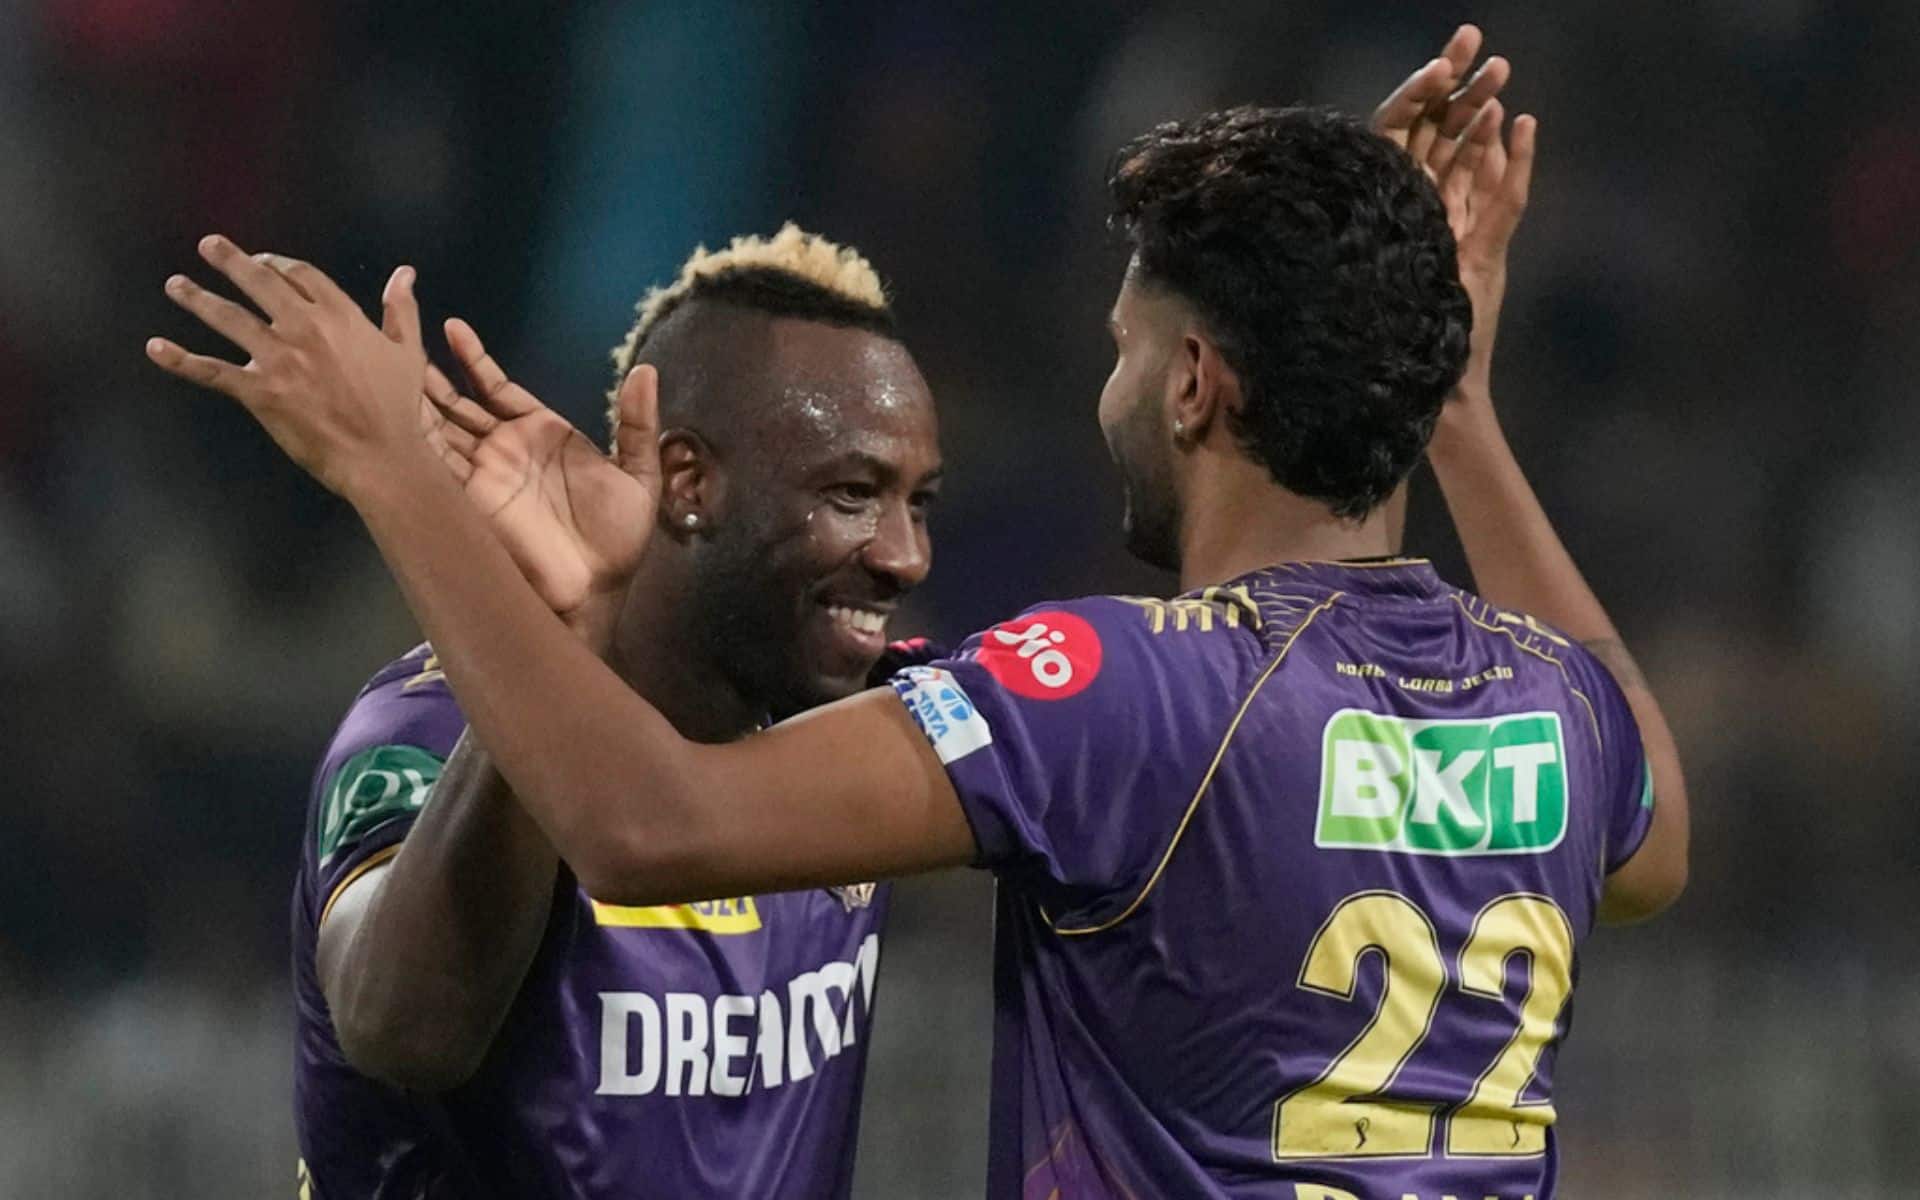 Kolkata Knight Riders have qualified for playoffs (X.com)